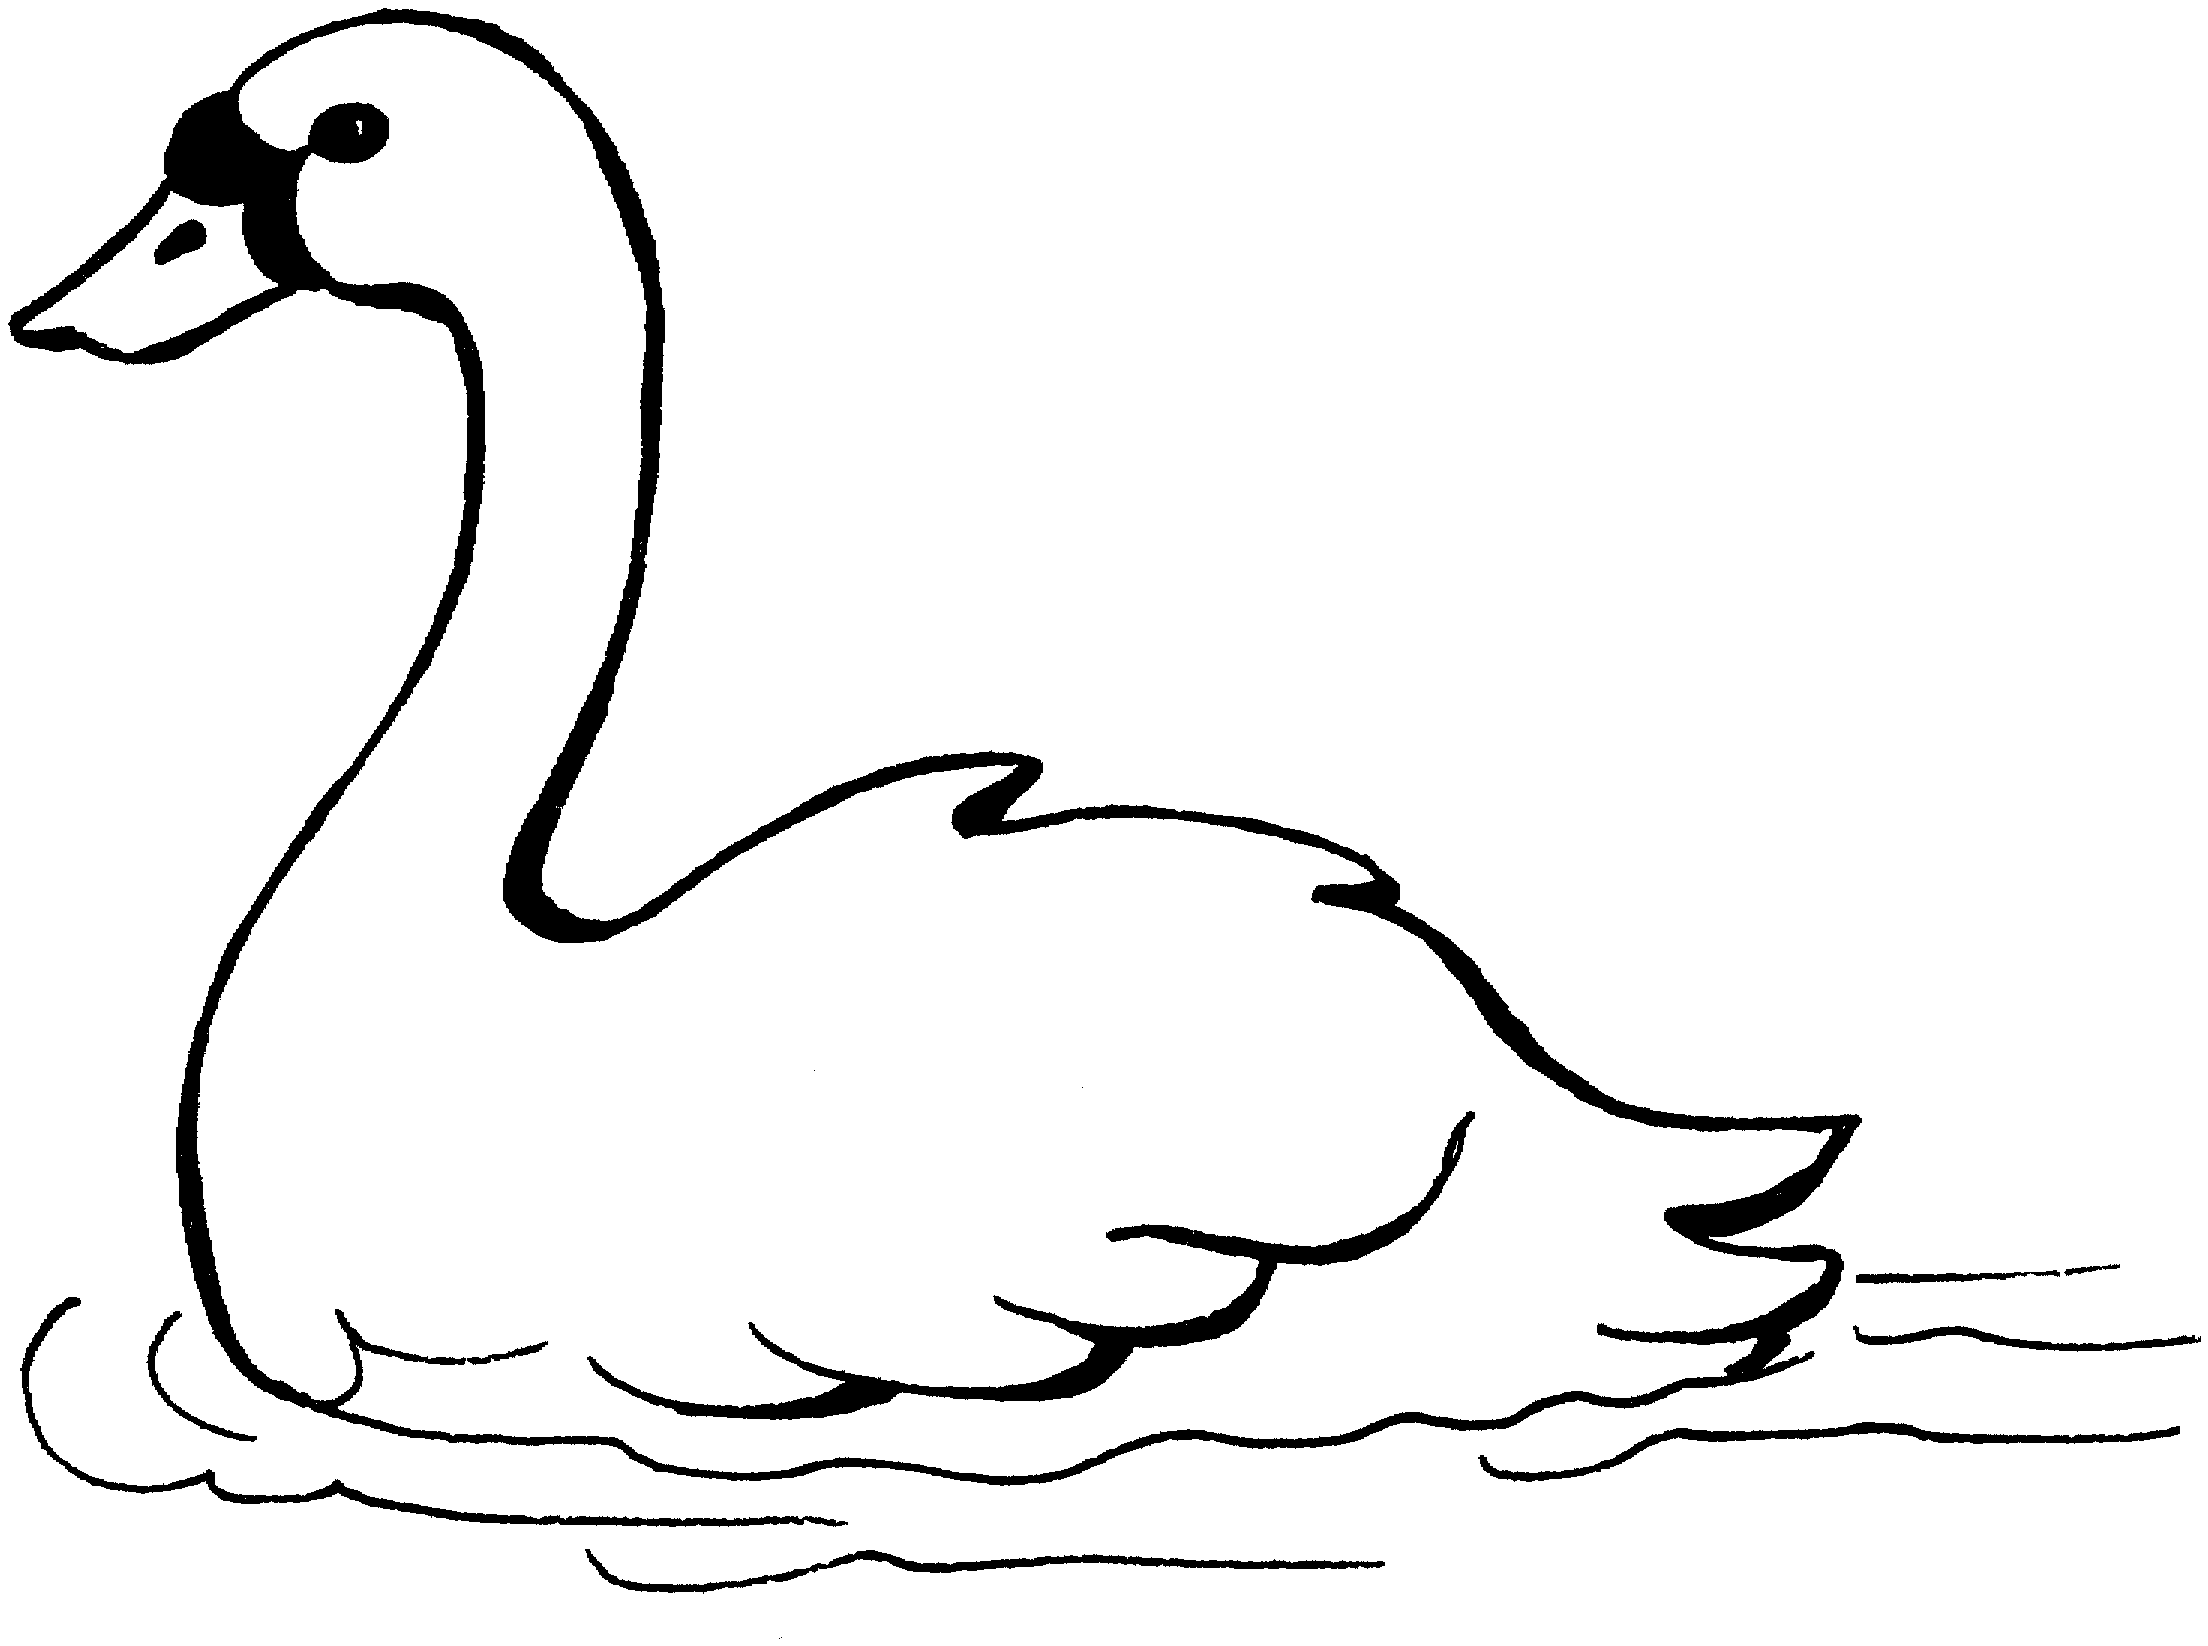 Swan clipart black and white clipartfest